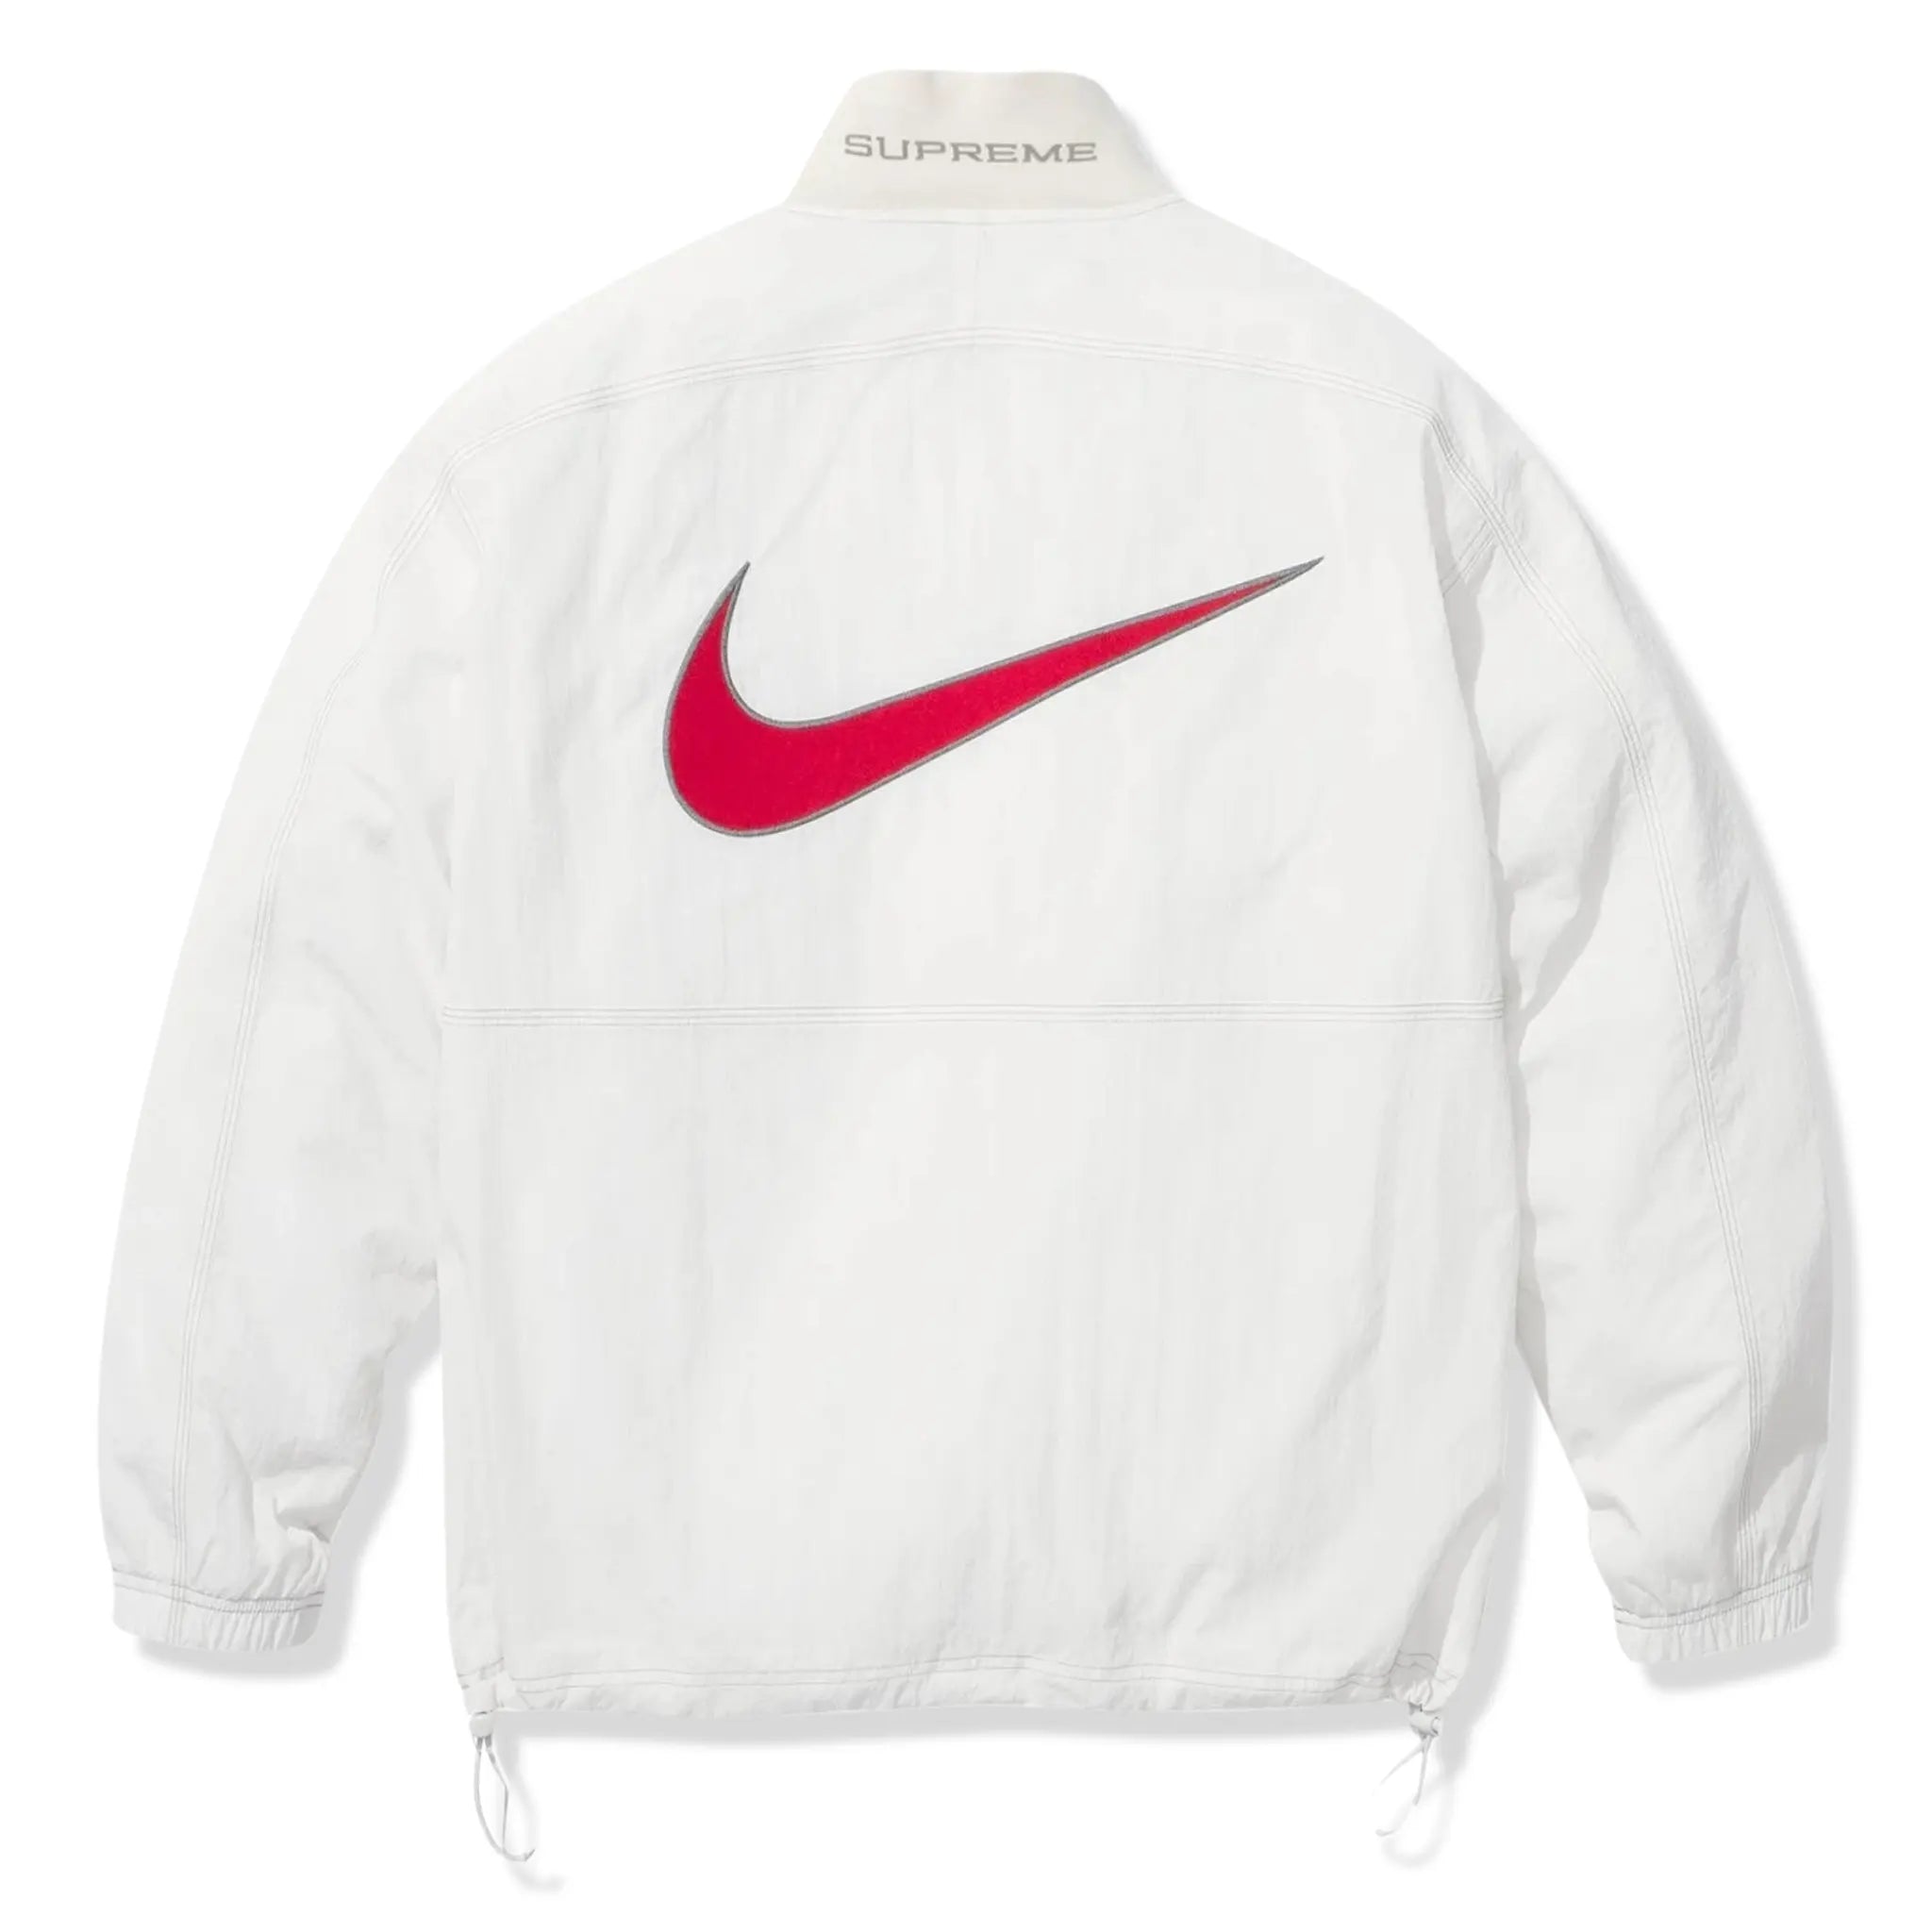 Back view of Nike Supreme Ripstop White Pullover